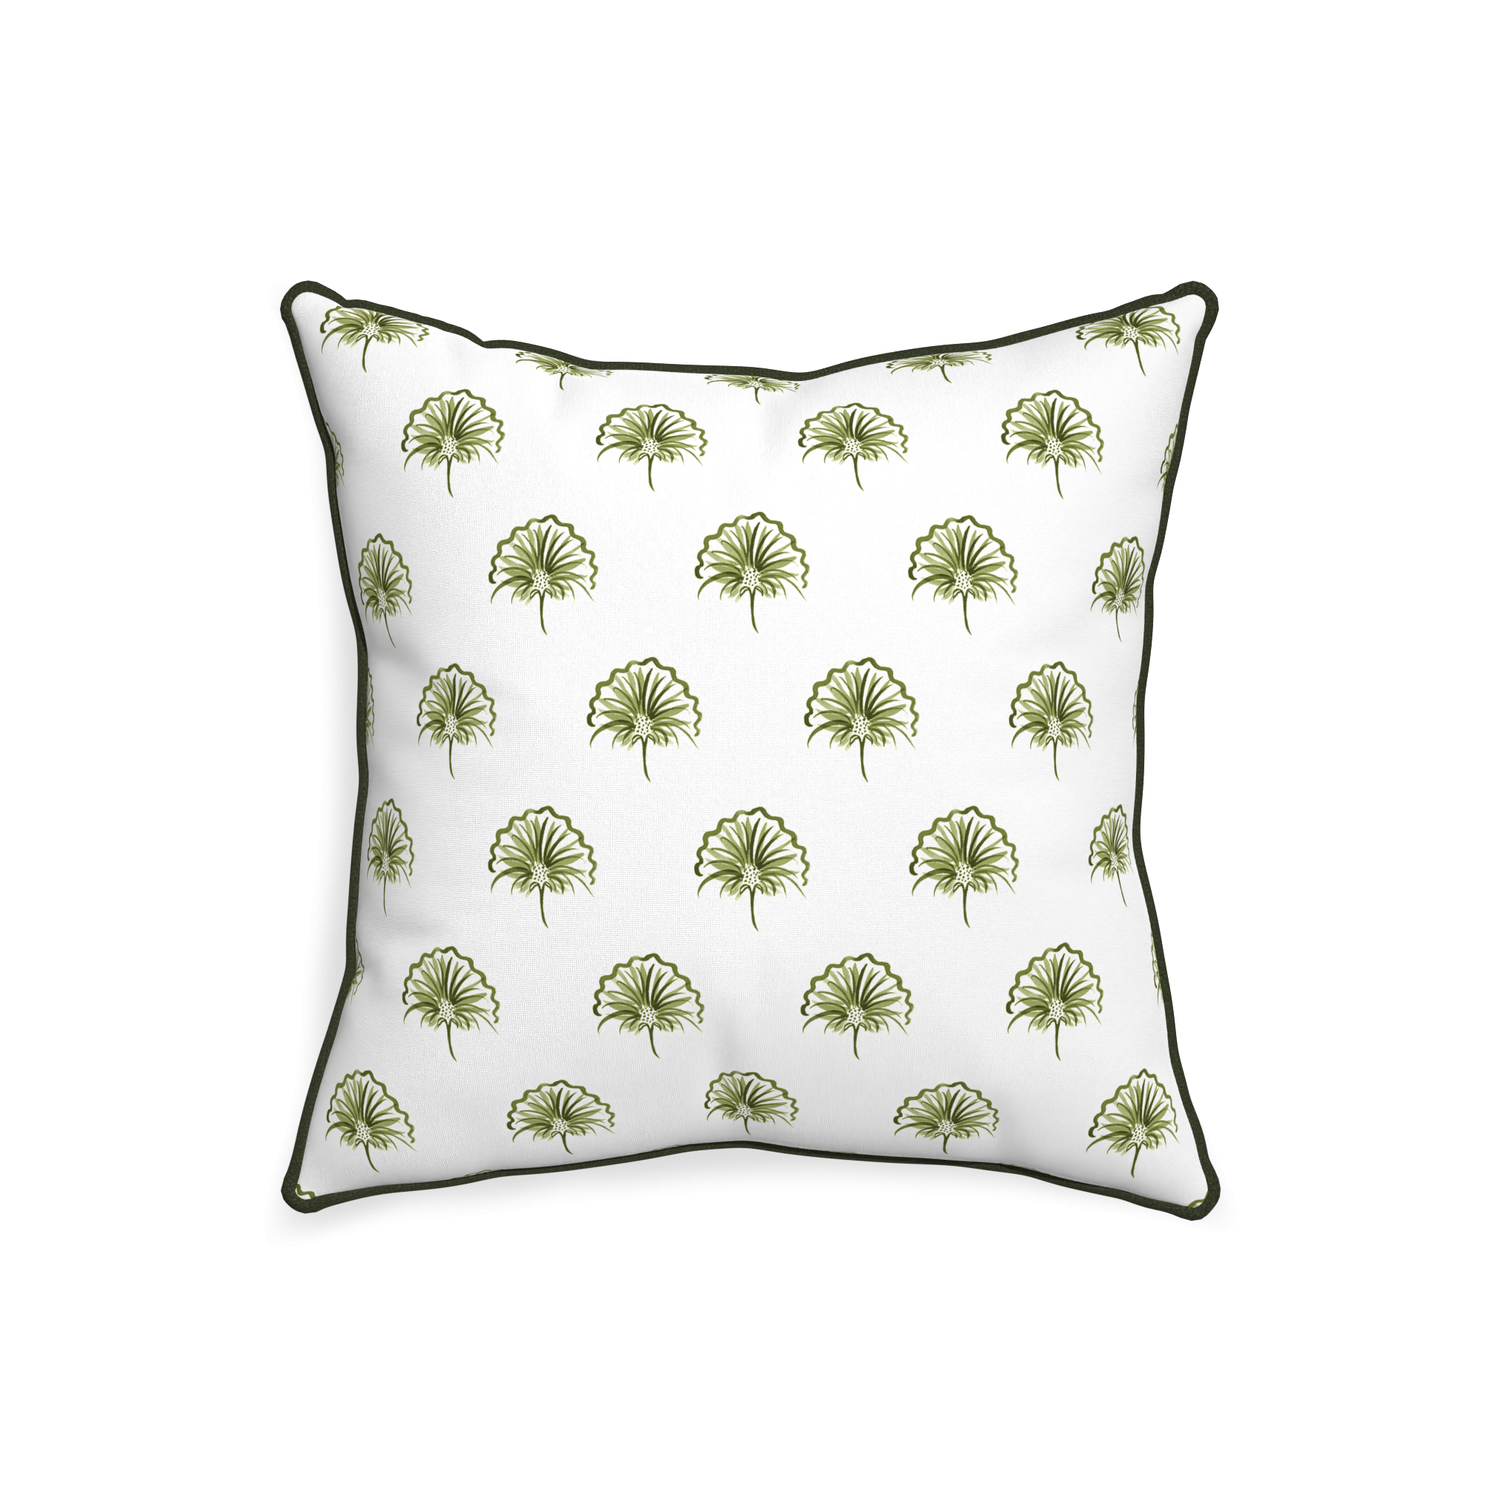 20-square penelope moss custom green floralpillow with f piping on white background